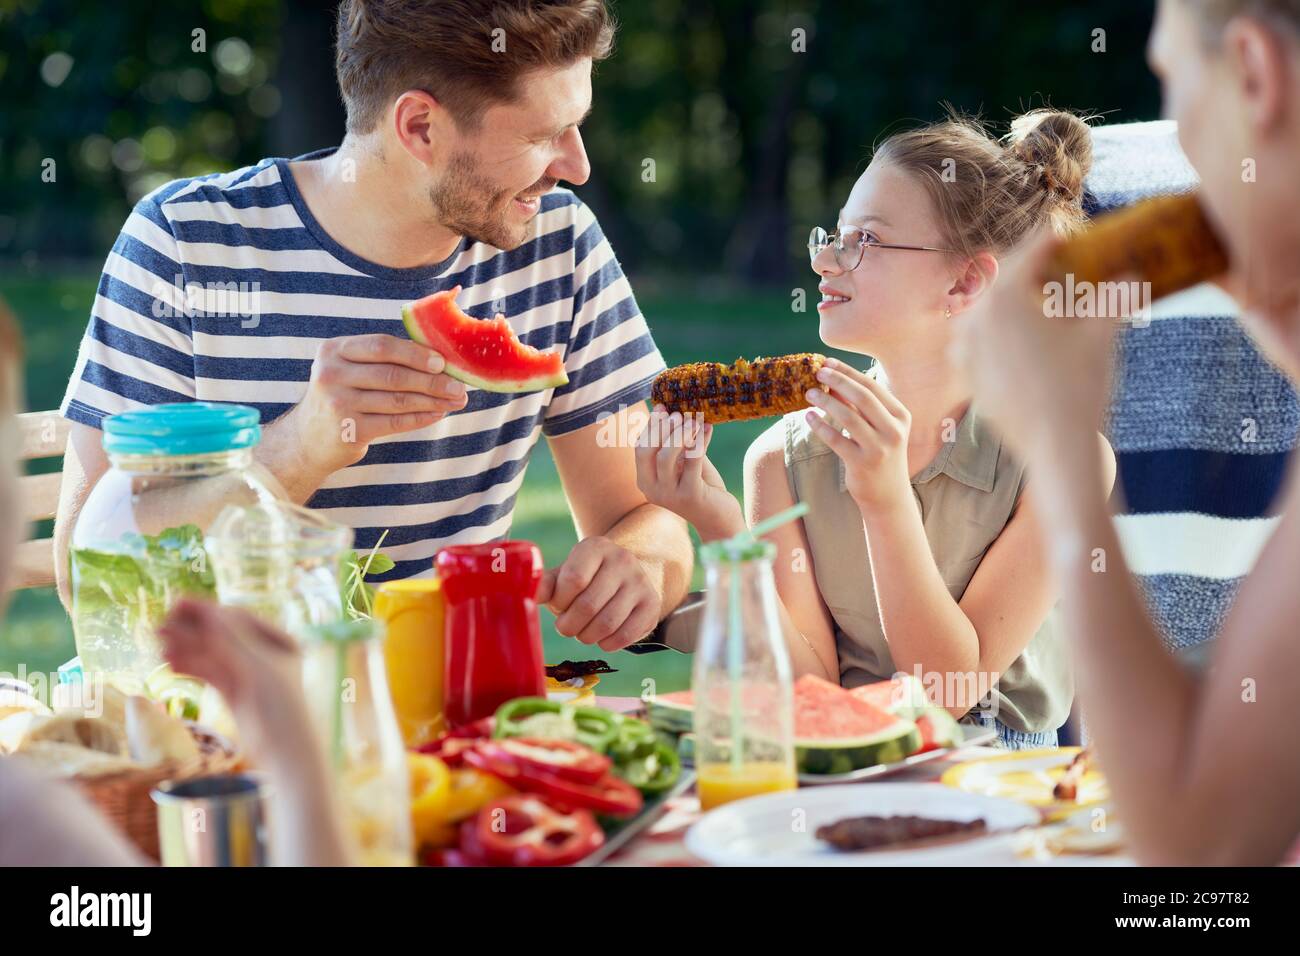 Family sitting at table and eating grilled food Stock Photo